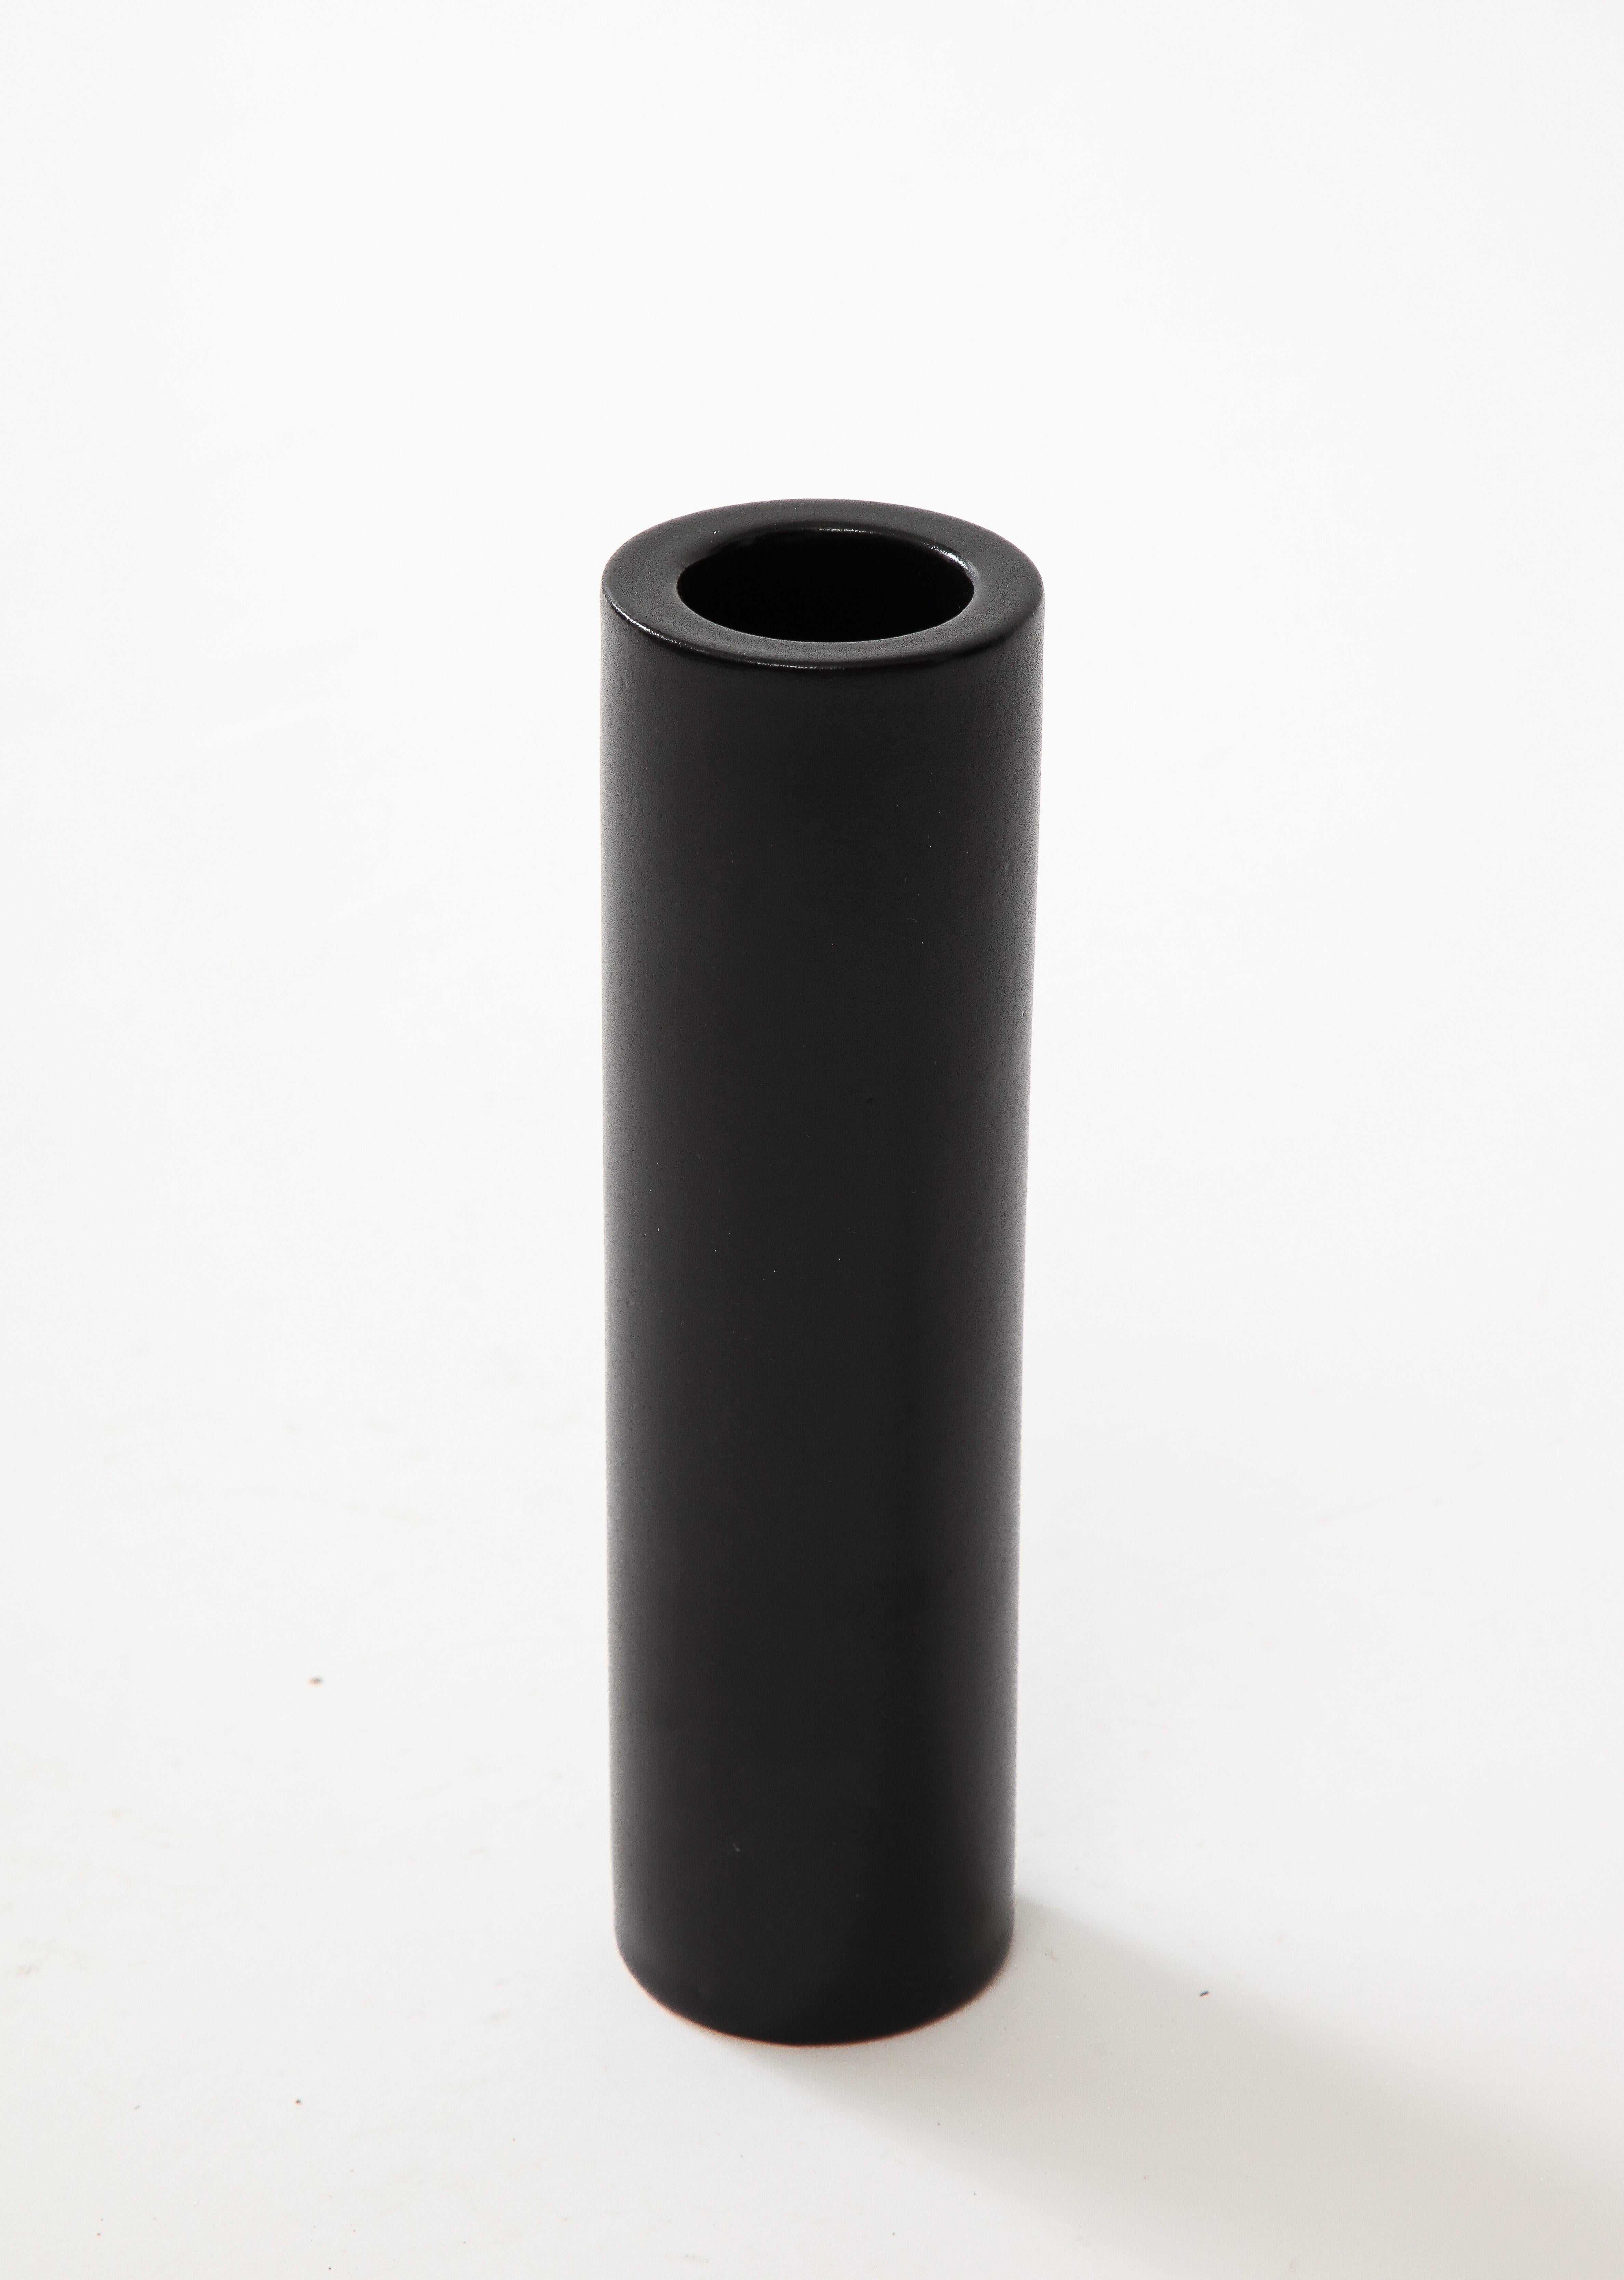 Franco Pozzi Cylinder Thick Walled Vase, Italy, c. 1970 For Sale 1